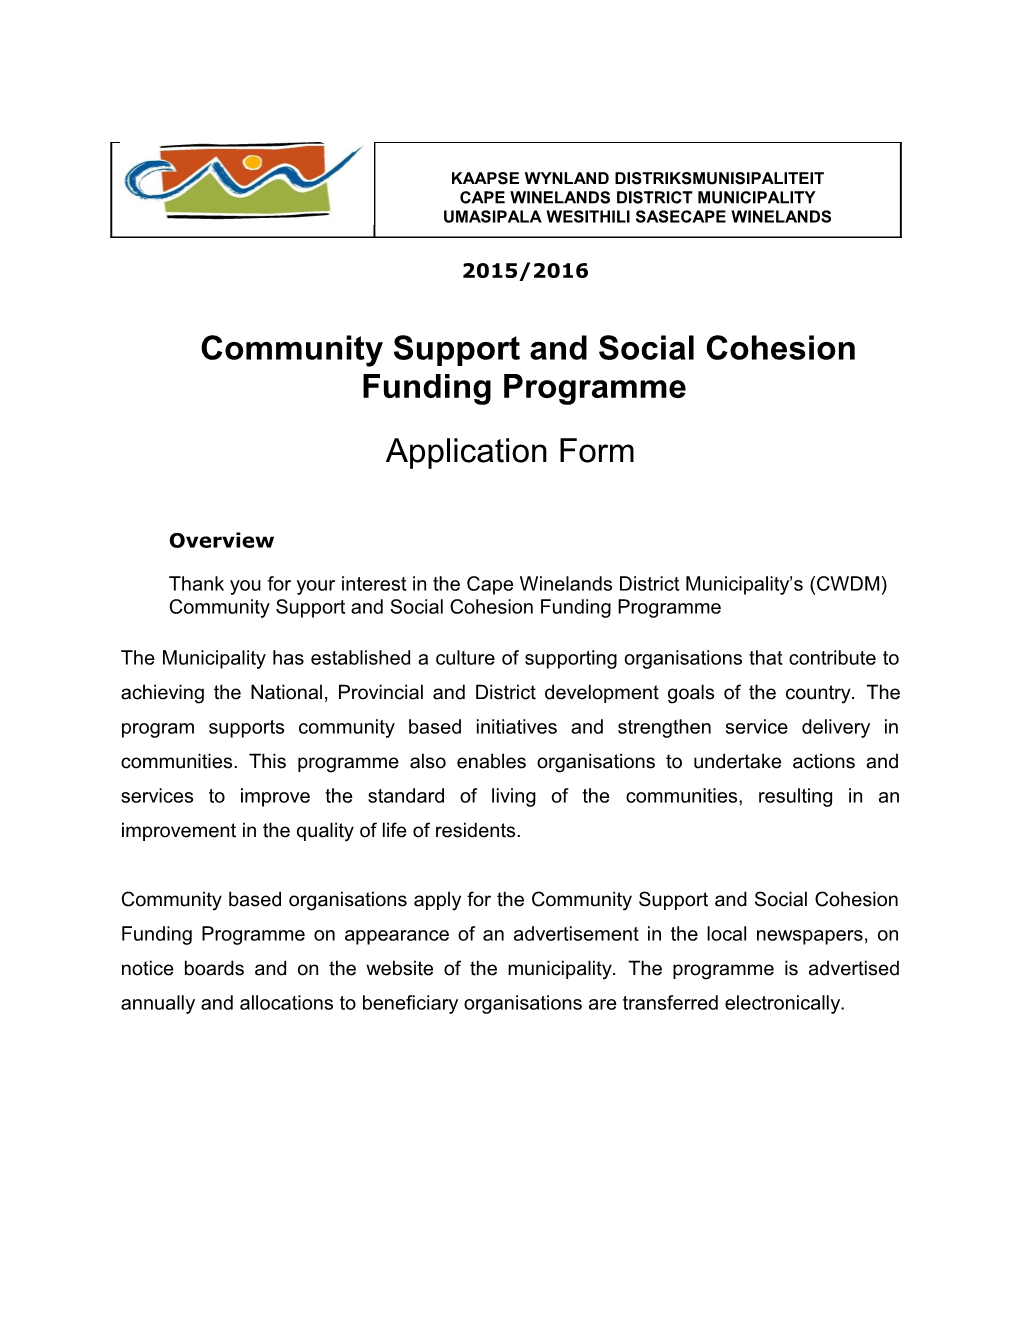 Community Support and Social Cohesion Funding Programme